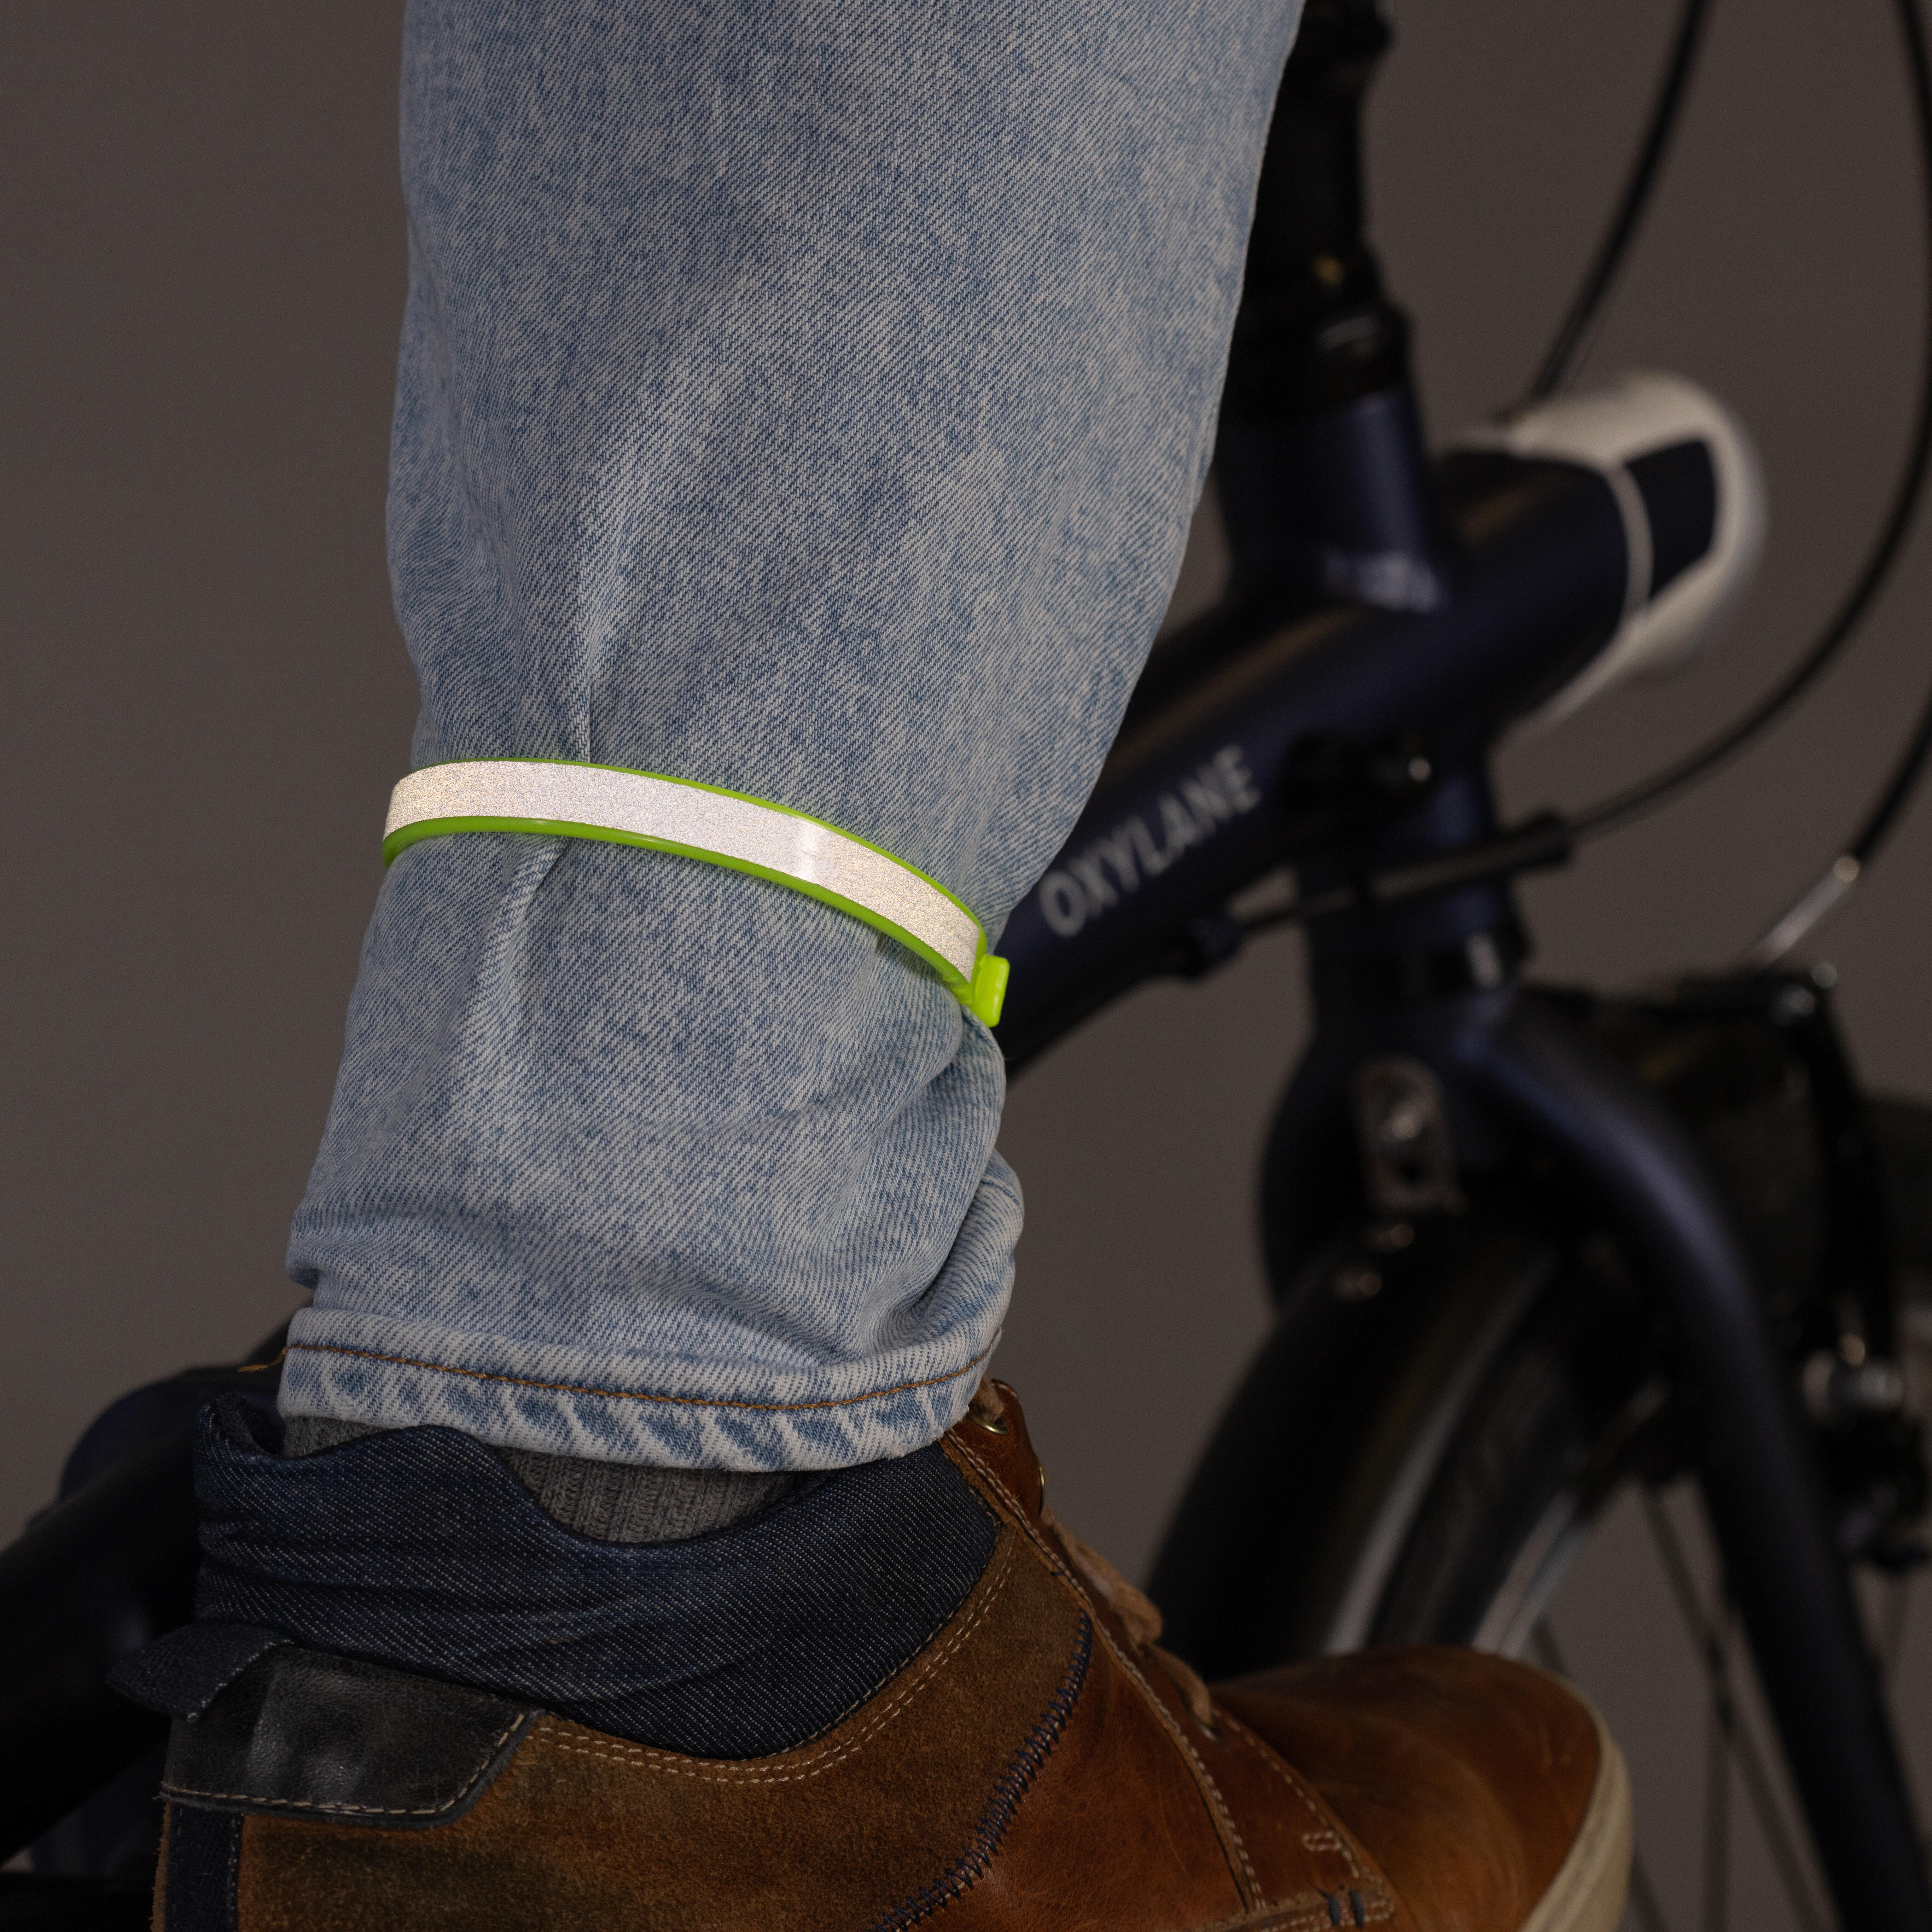 TROUSERS PROTECTOR JEANS Strap Ankle Strip for Legs Cyclist  Etsy